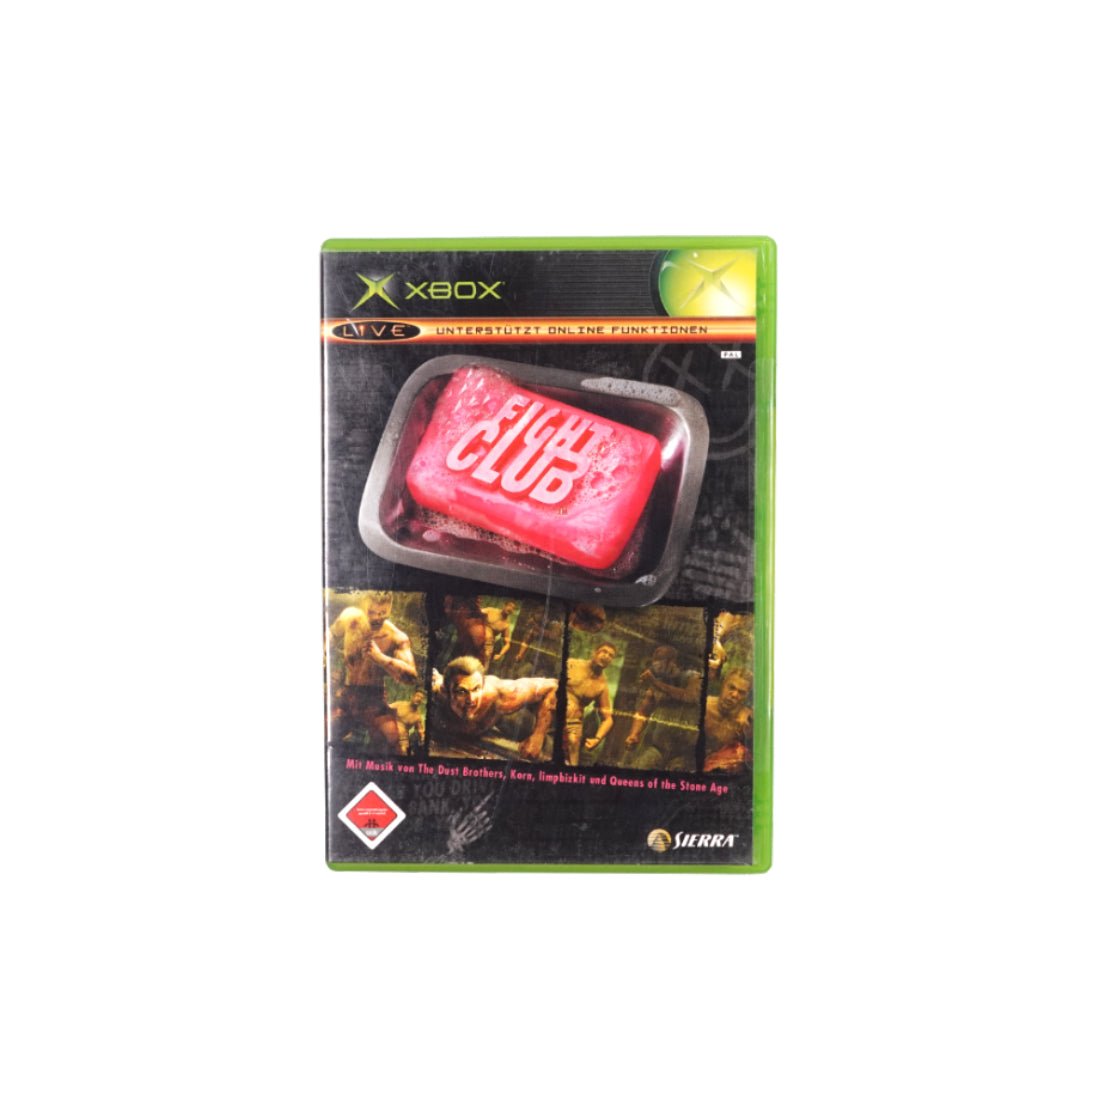 (Pre-Owned) Fight Club - Xbox - Store 974 | ستور ٩٧٤